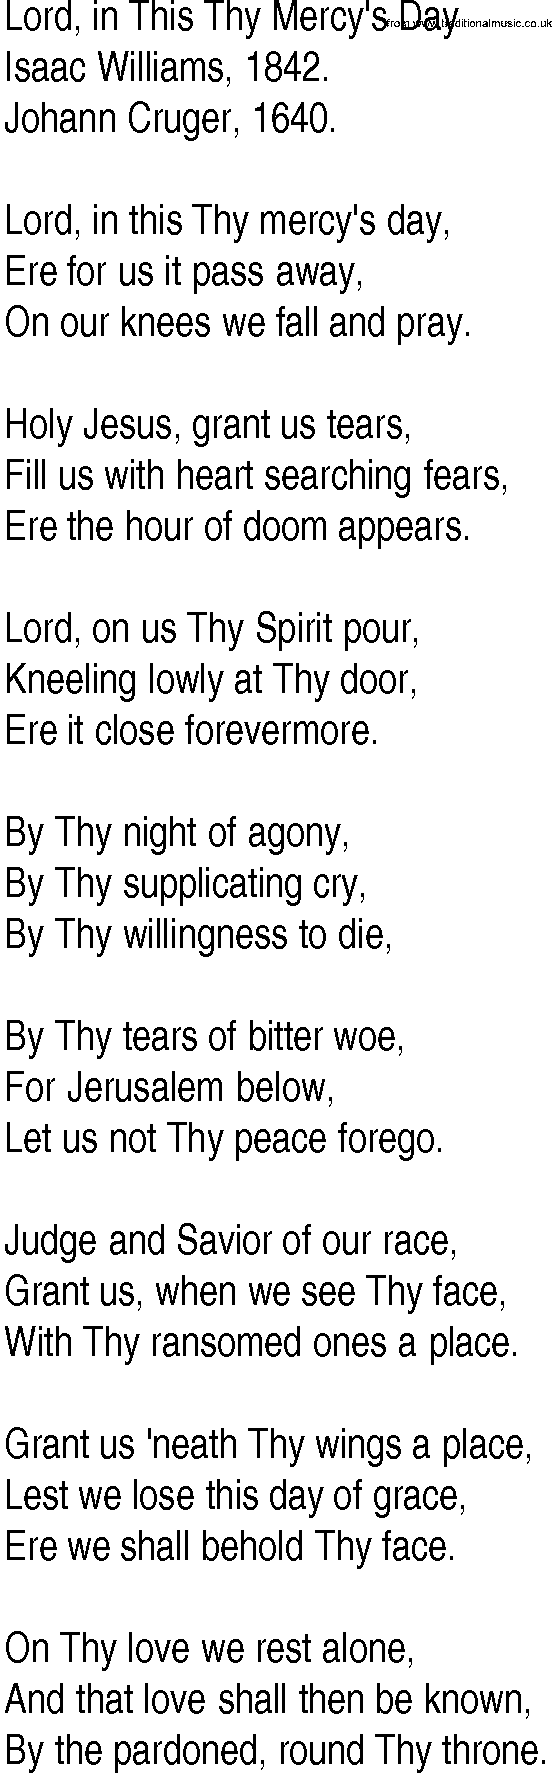 Hymn and Gospel Song: Lord, in This Thy Mercy's Day by Isaac Williams lyrics